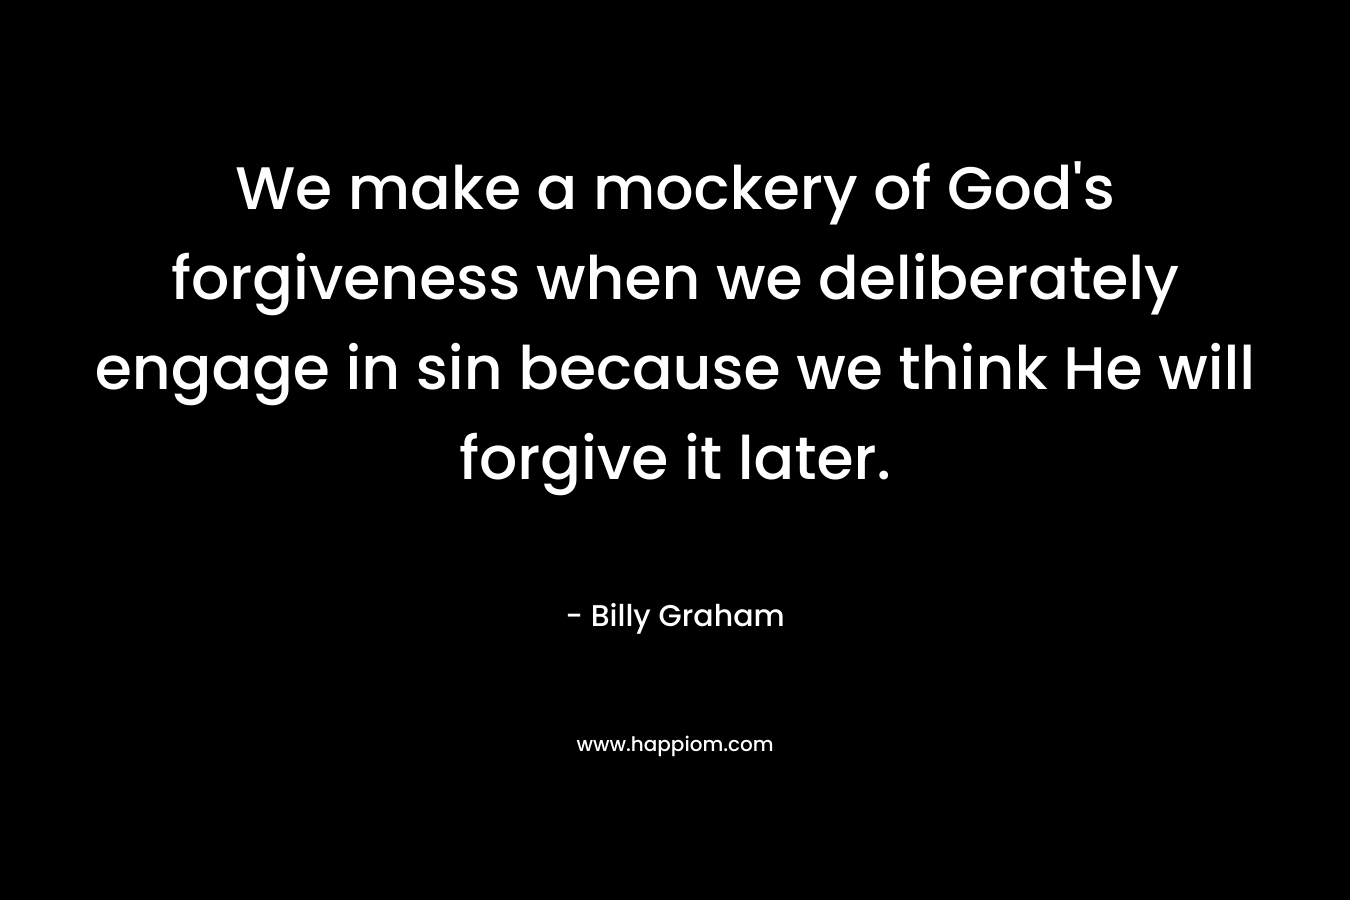 We make a mockery of God's forgiveness when we deliberately engage in sin because we think He will forgive it later.